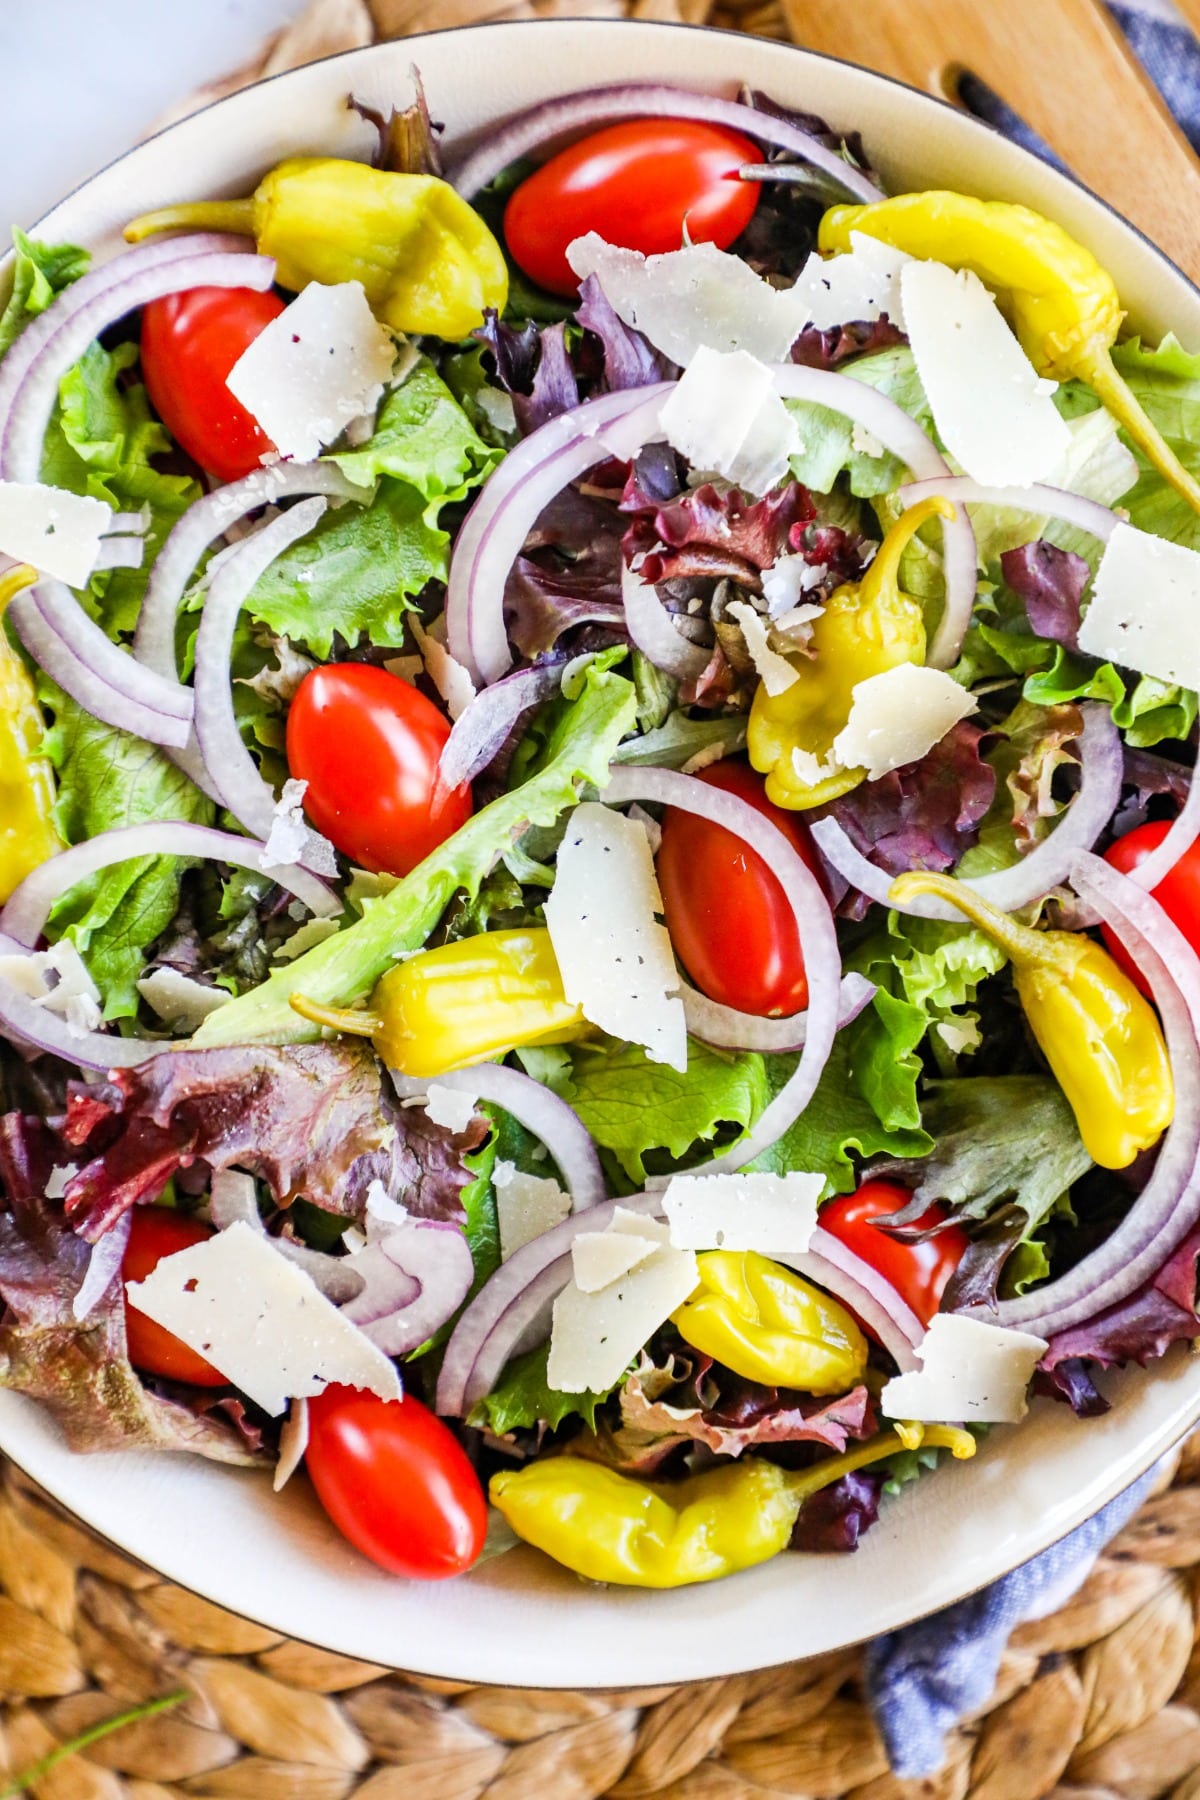 An image of a house salad with onions, tomatoes and lettuce